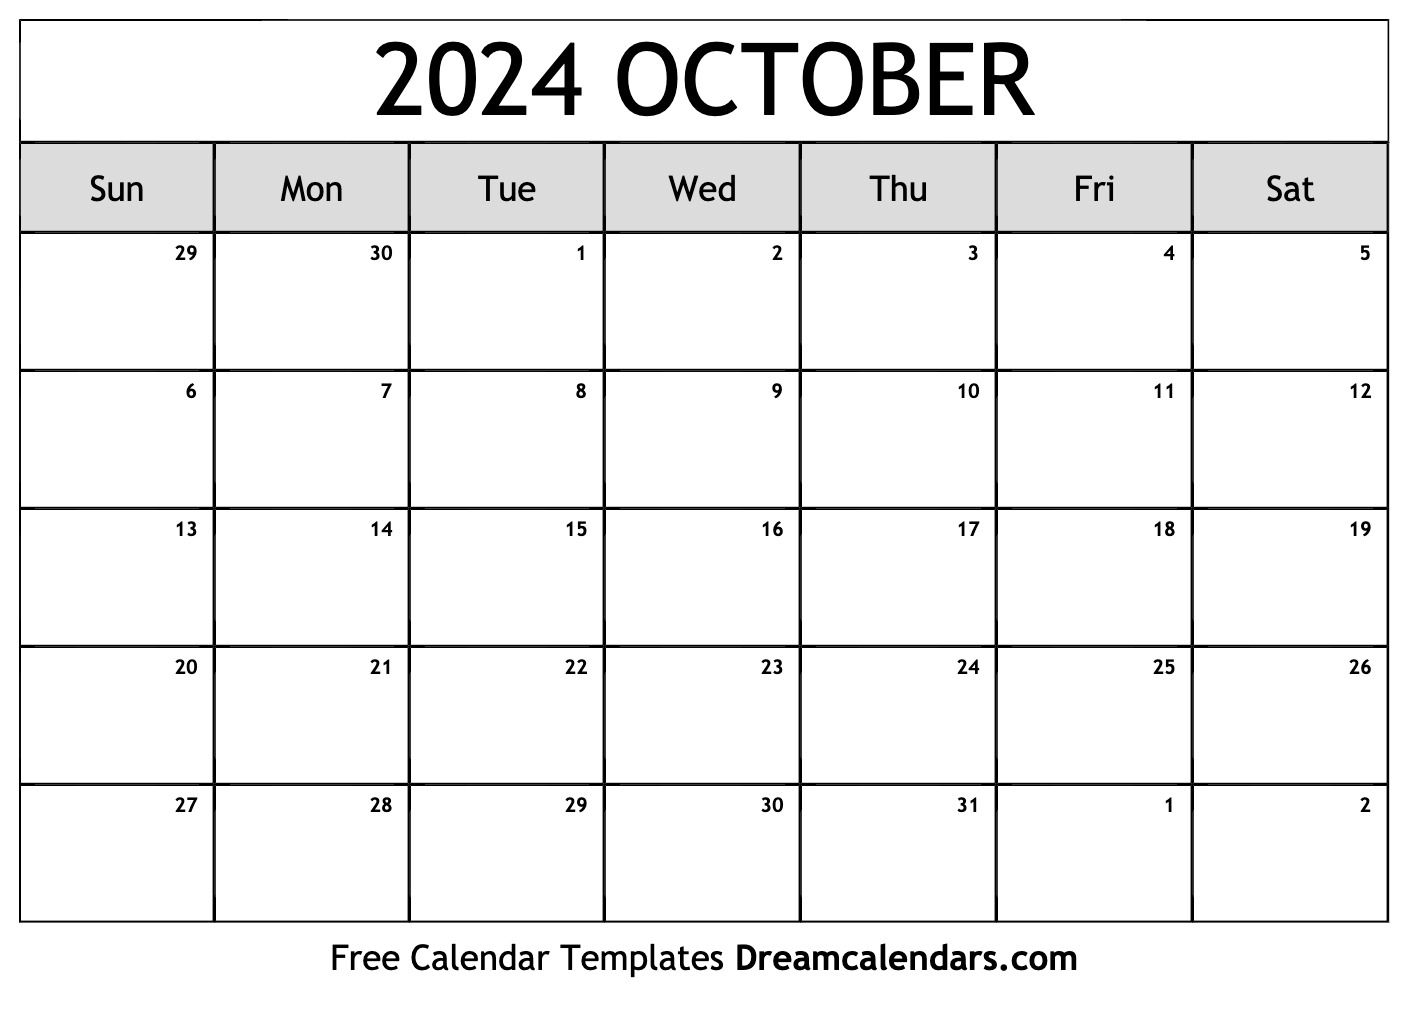 October 2024 Calendar | Free Blank Printable With Holidays for October 2024 Calendar Printable Free